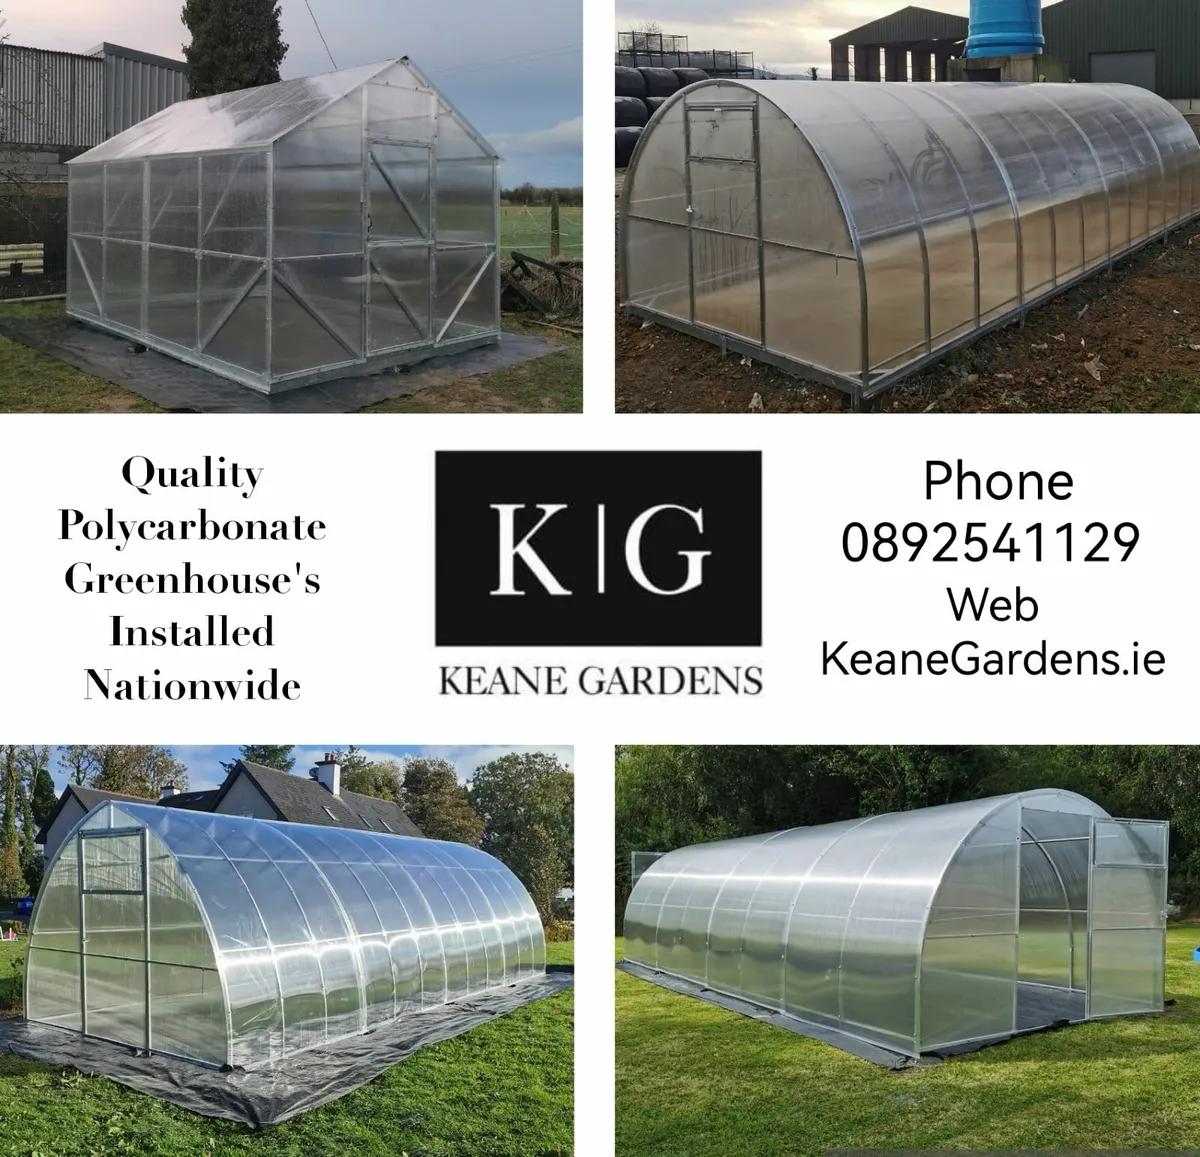 Polycarbonate Greenhouses - Image 1